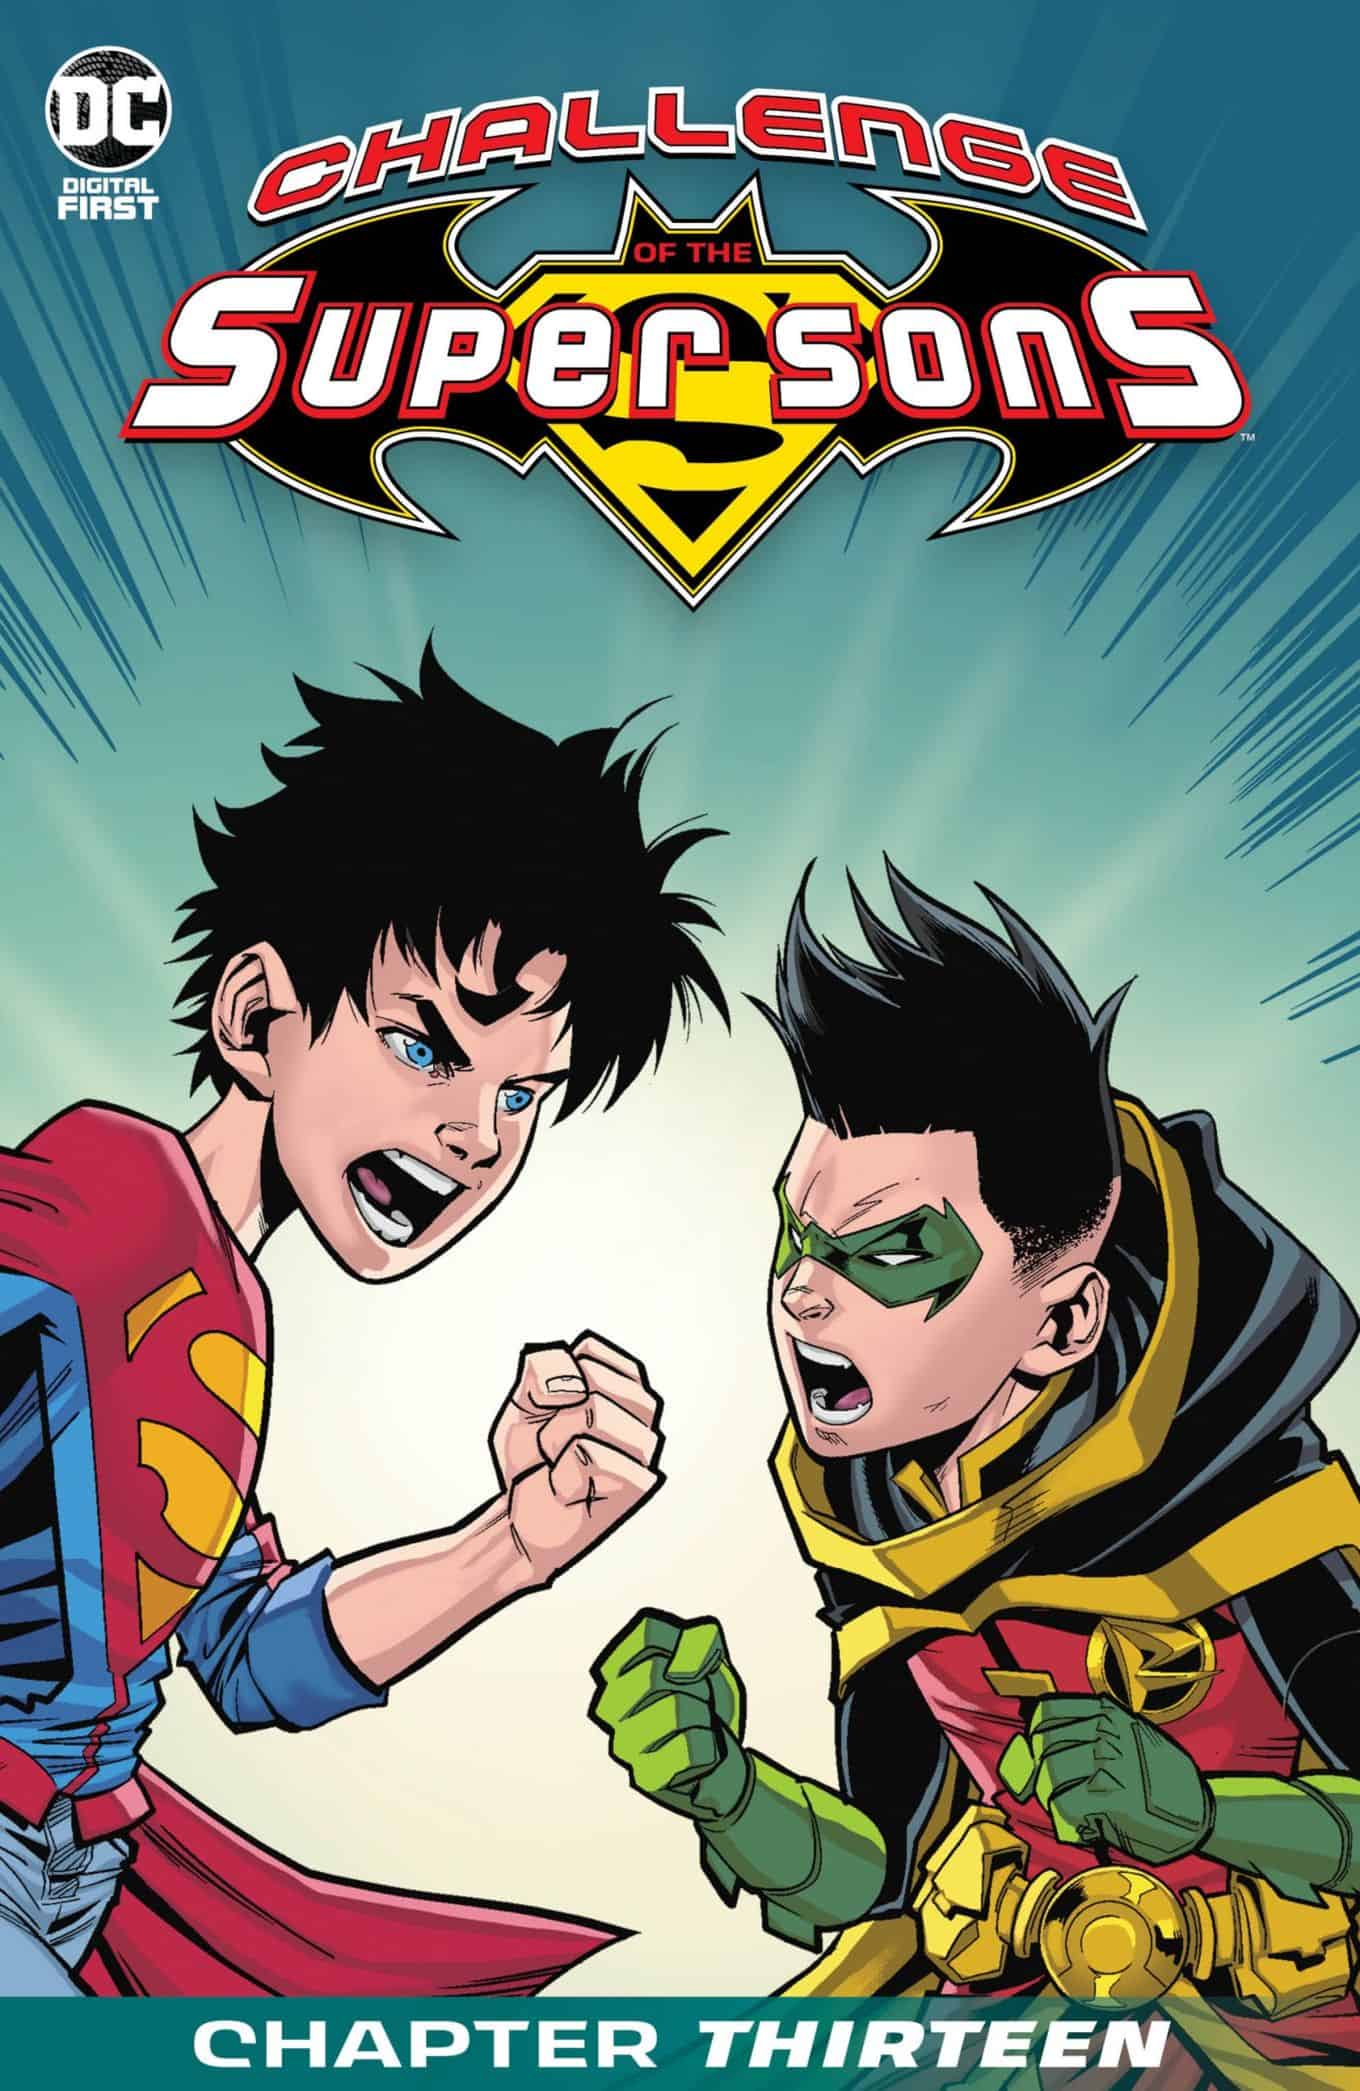 Challenge Of The Super Sons 13 Spoilers 0 1 Inside Pulse 